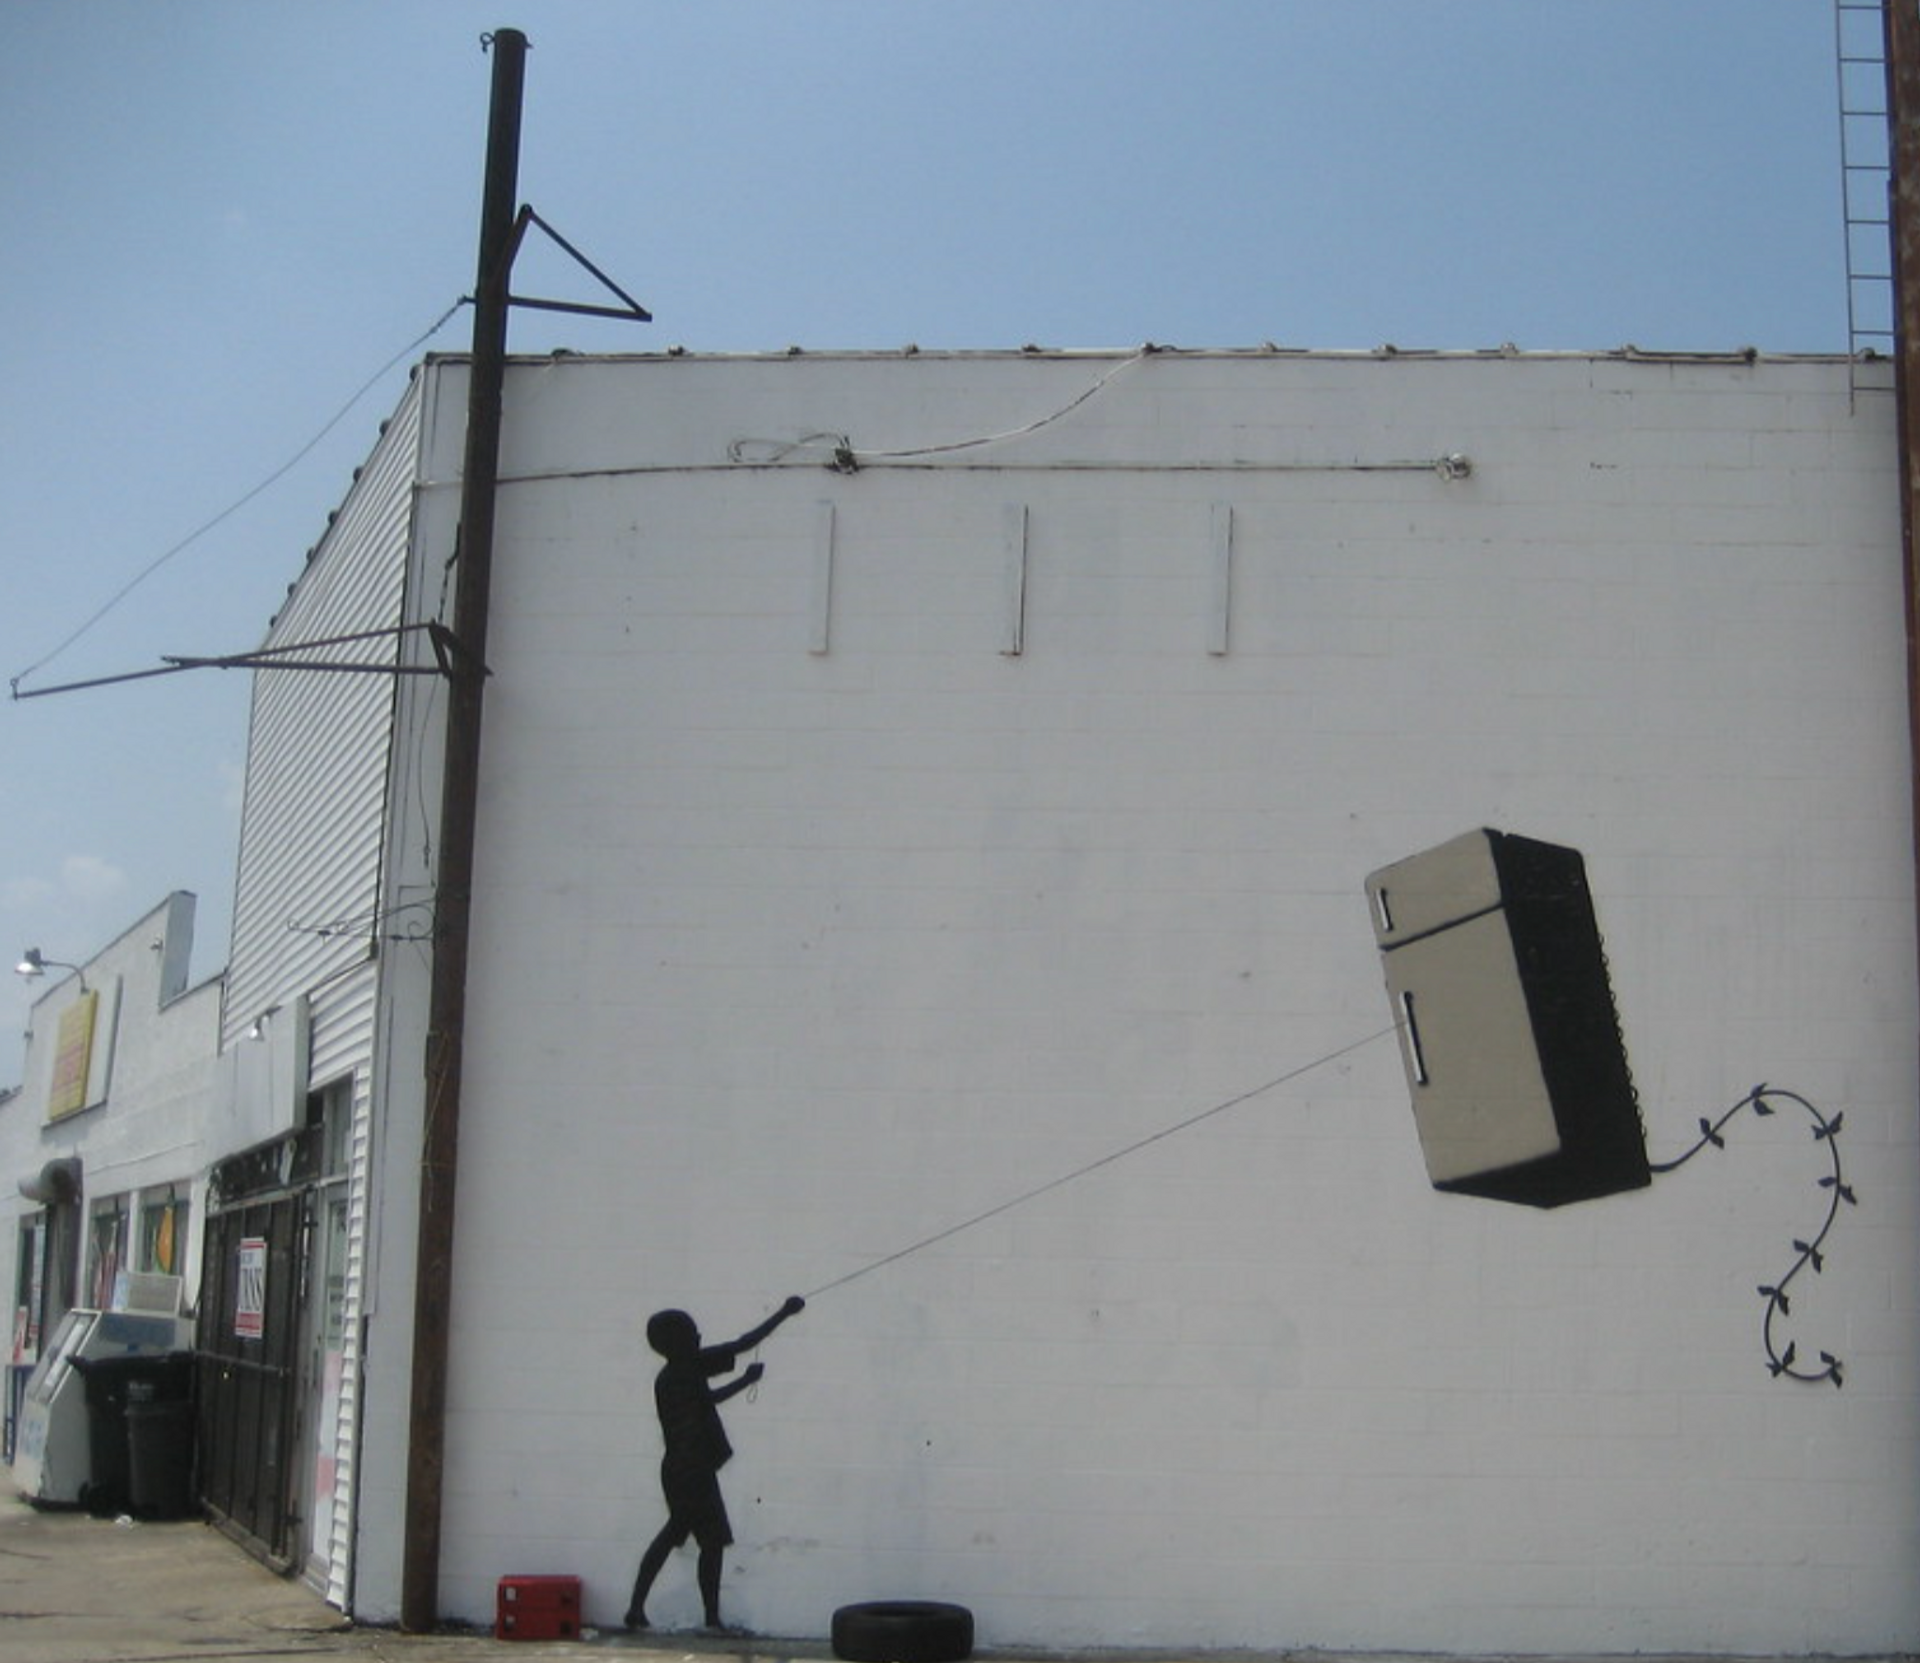 Child with Kite Fridge by Banksy